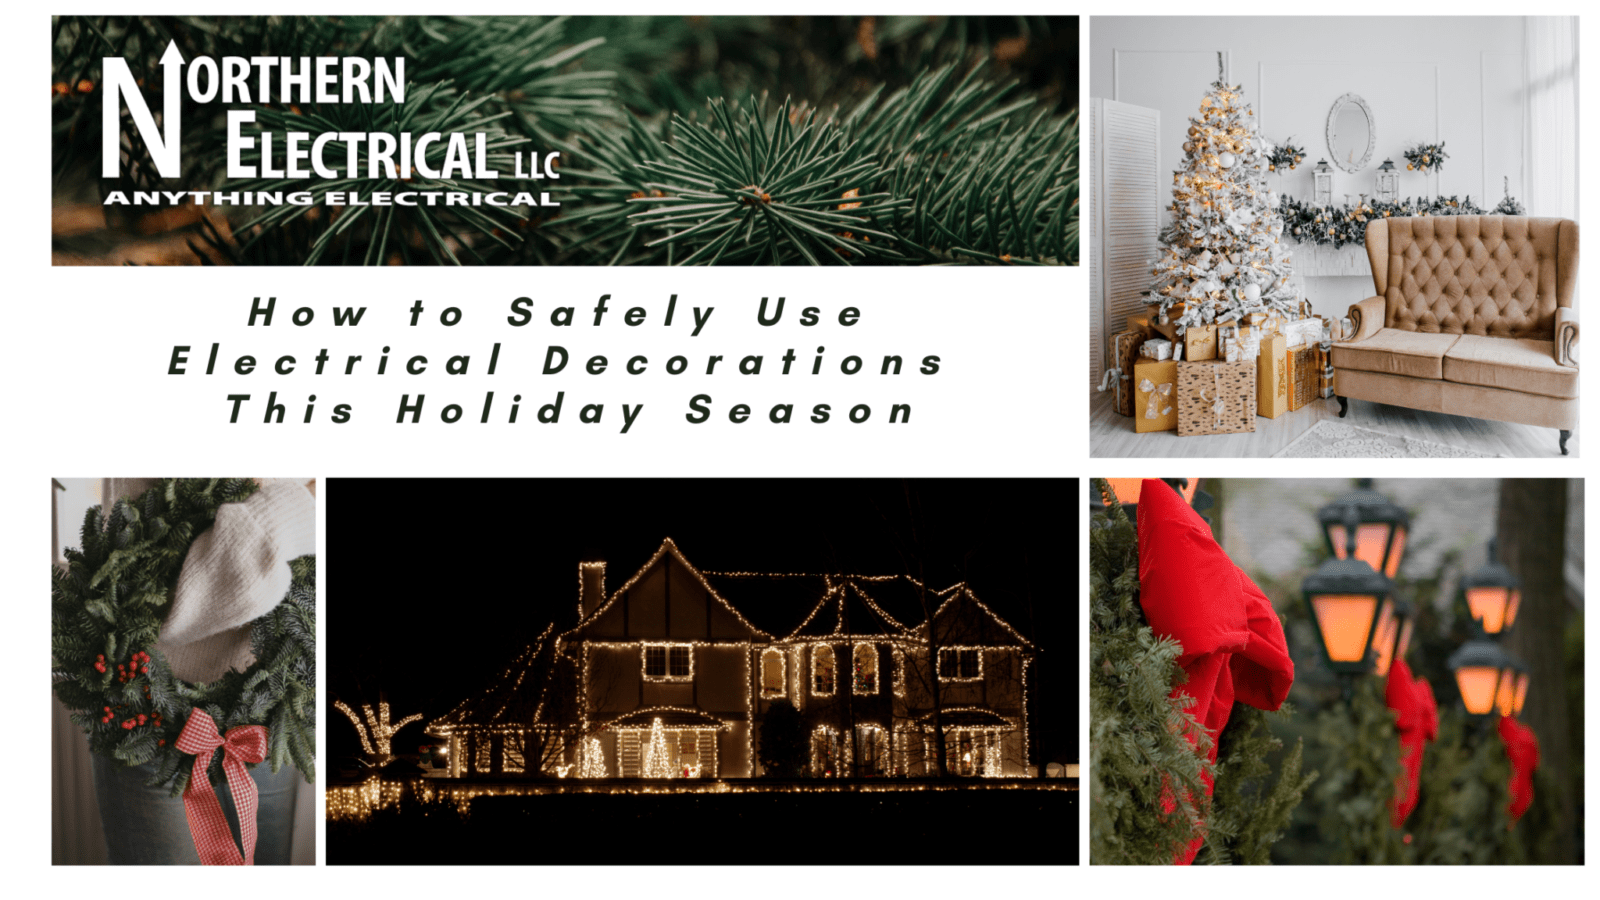 How to Safely Use Electrical Decorations This Holiday Season